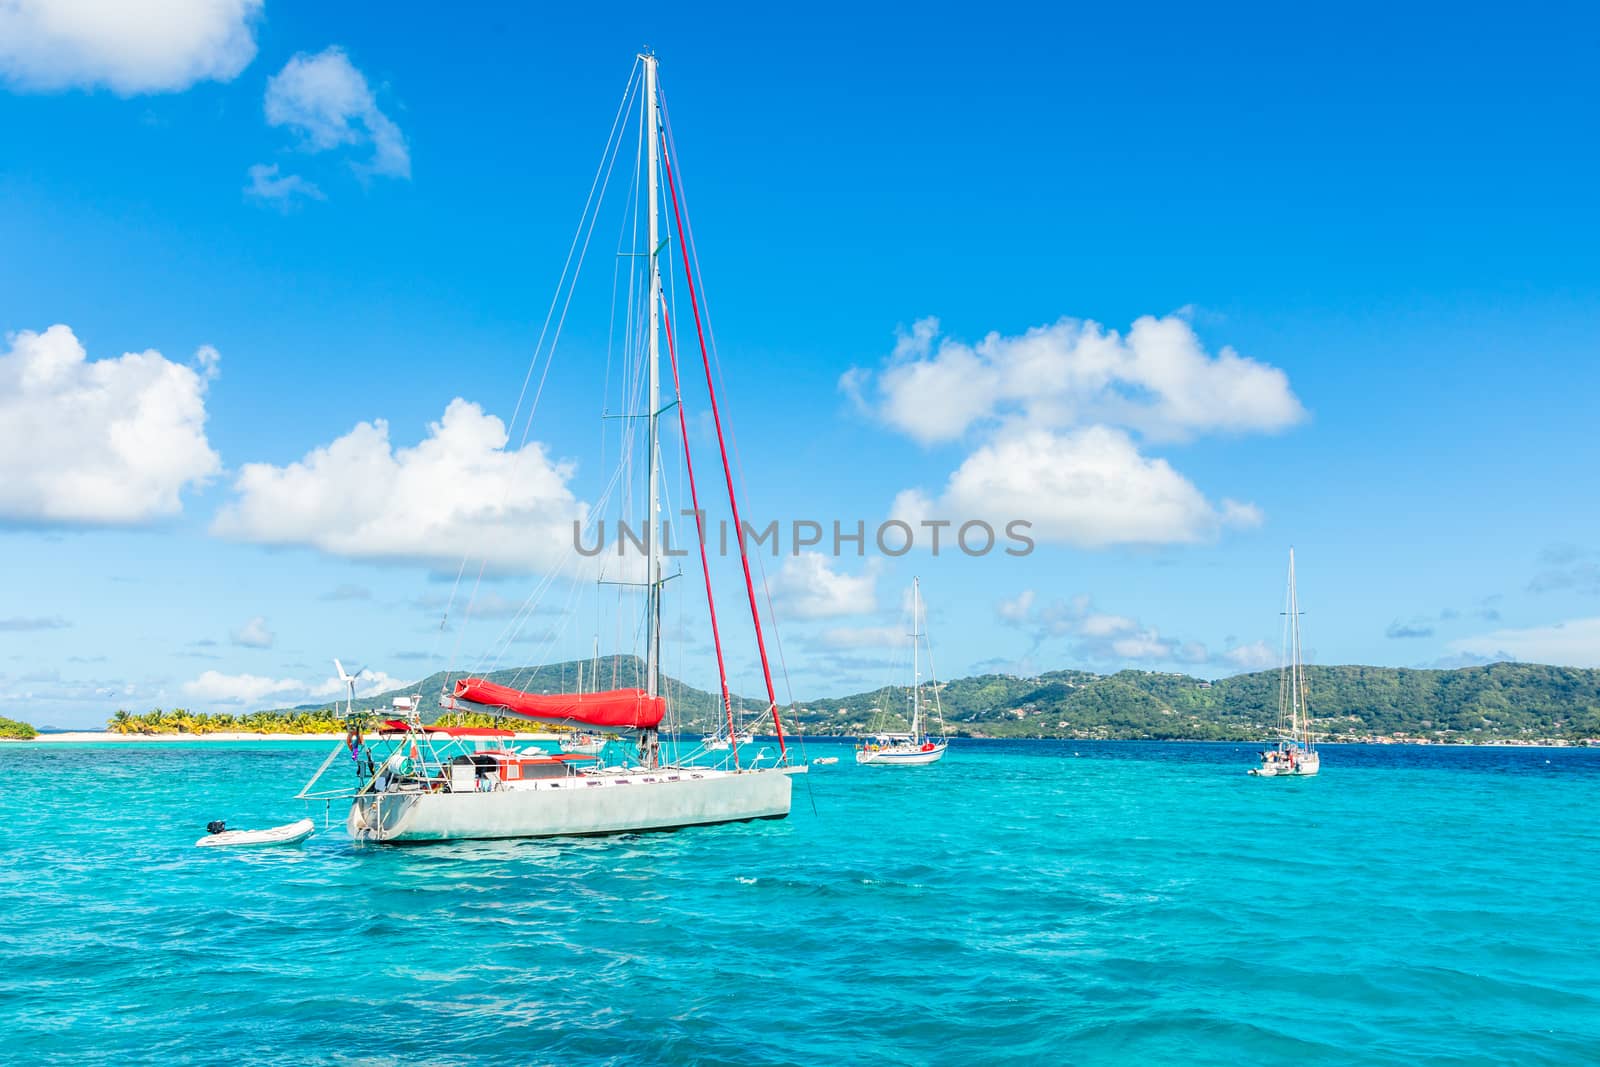 Turquoise sea and anchored yachts near Carriacou island, Grenada by ambeon